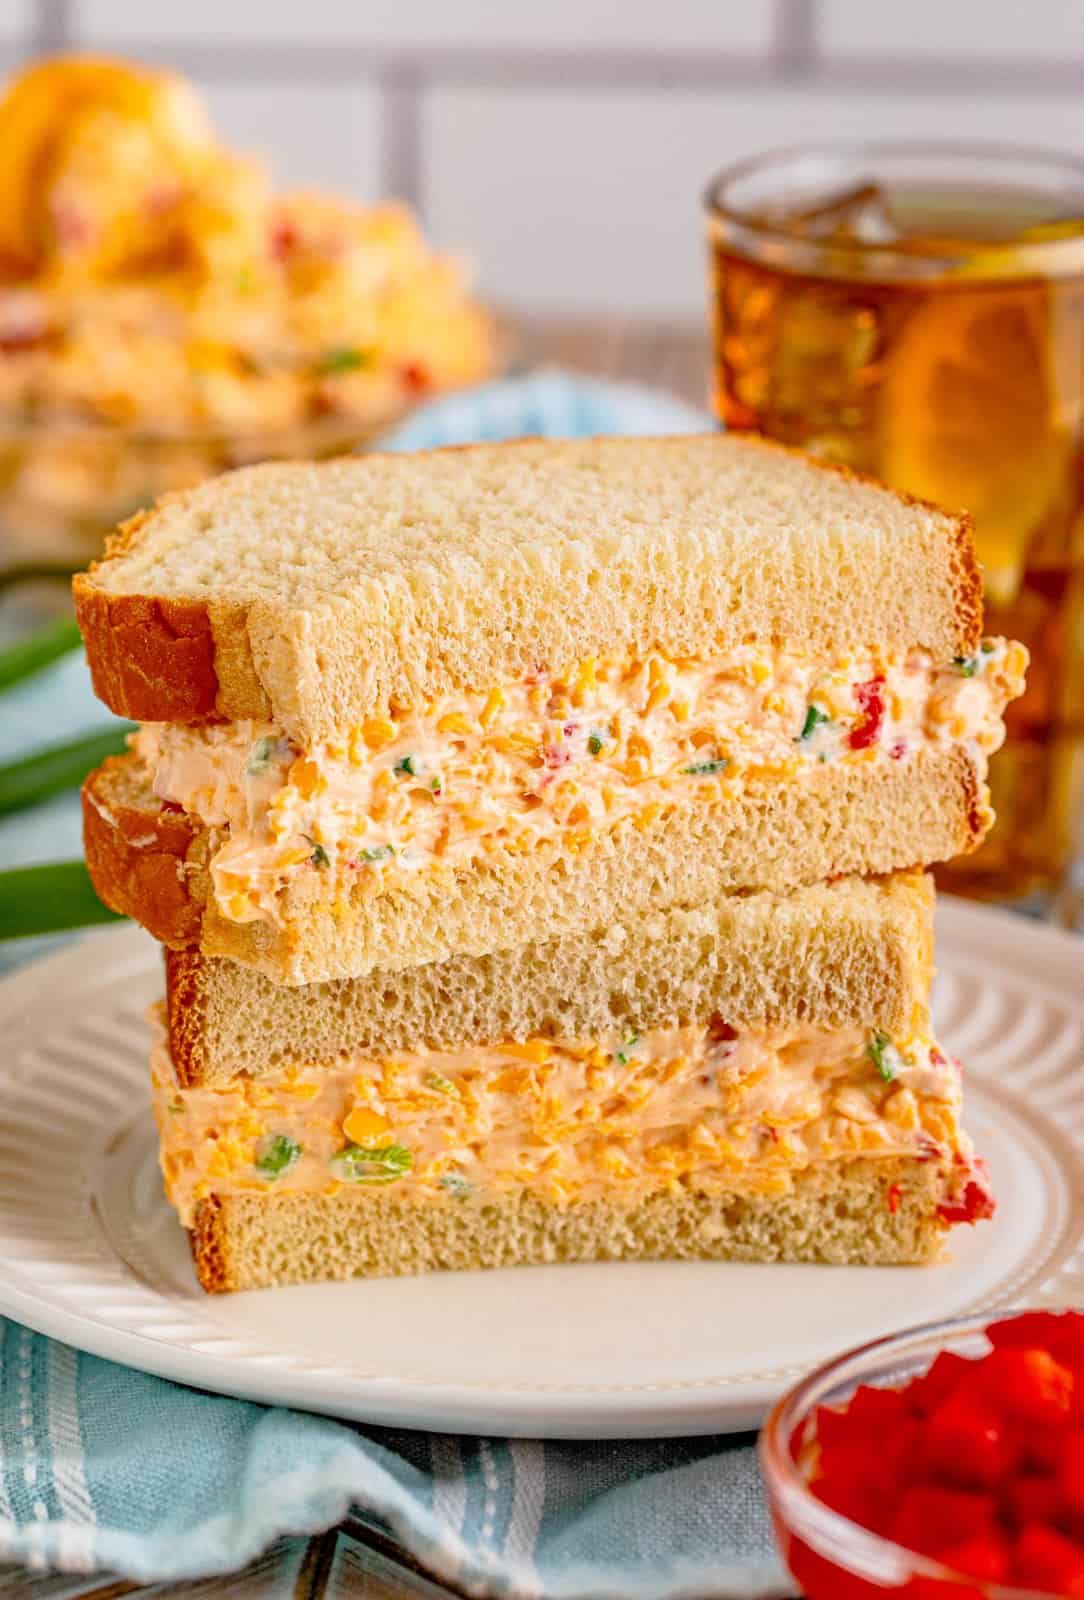 Stacked Pimento Cheese on sandwich split in half.